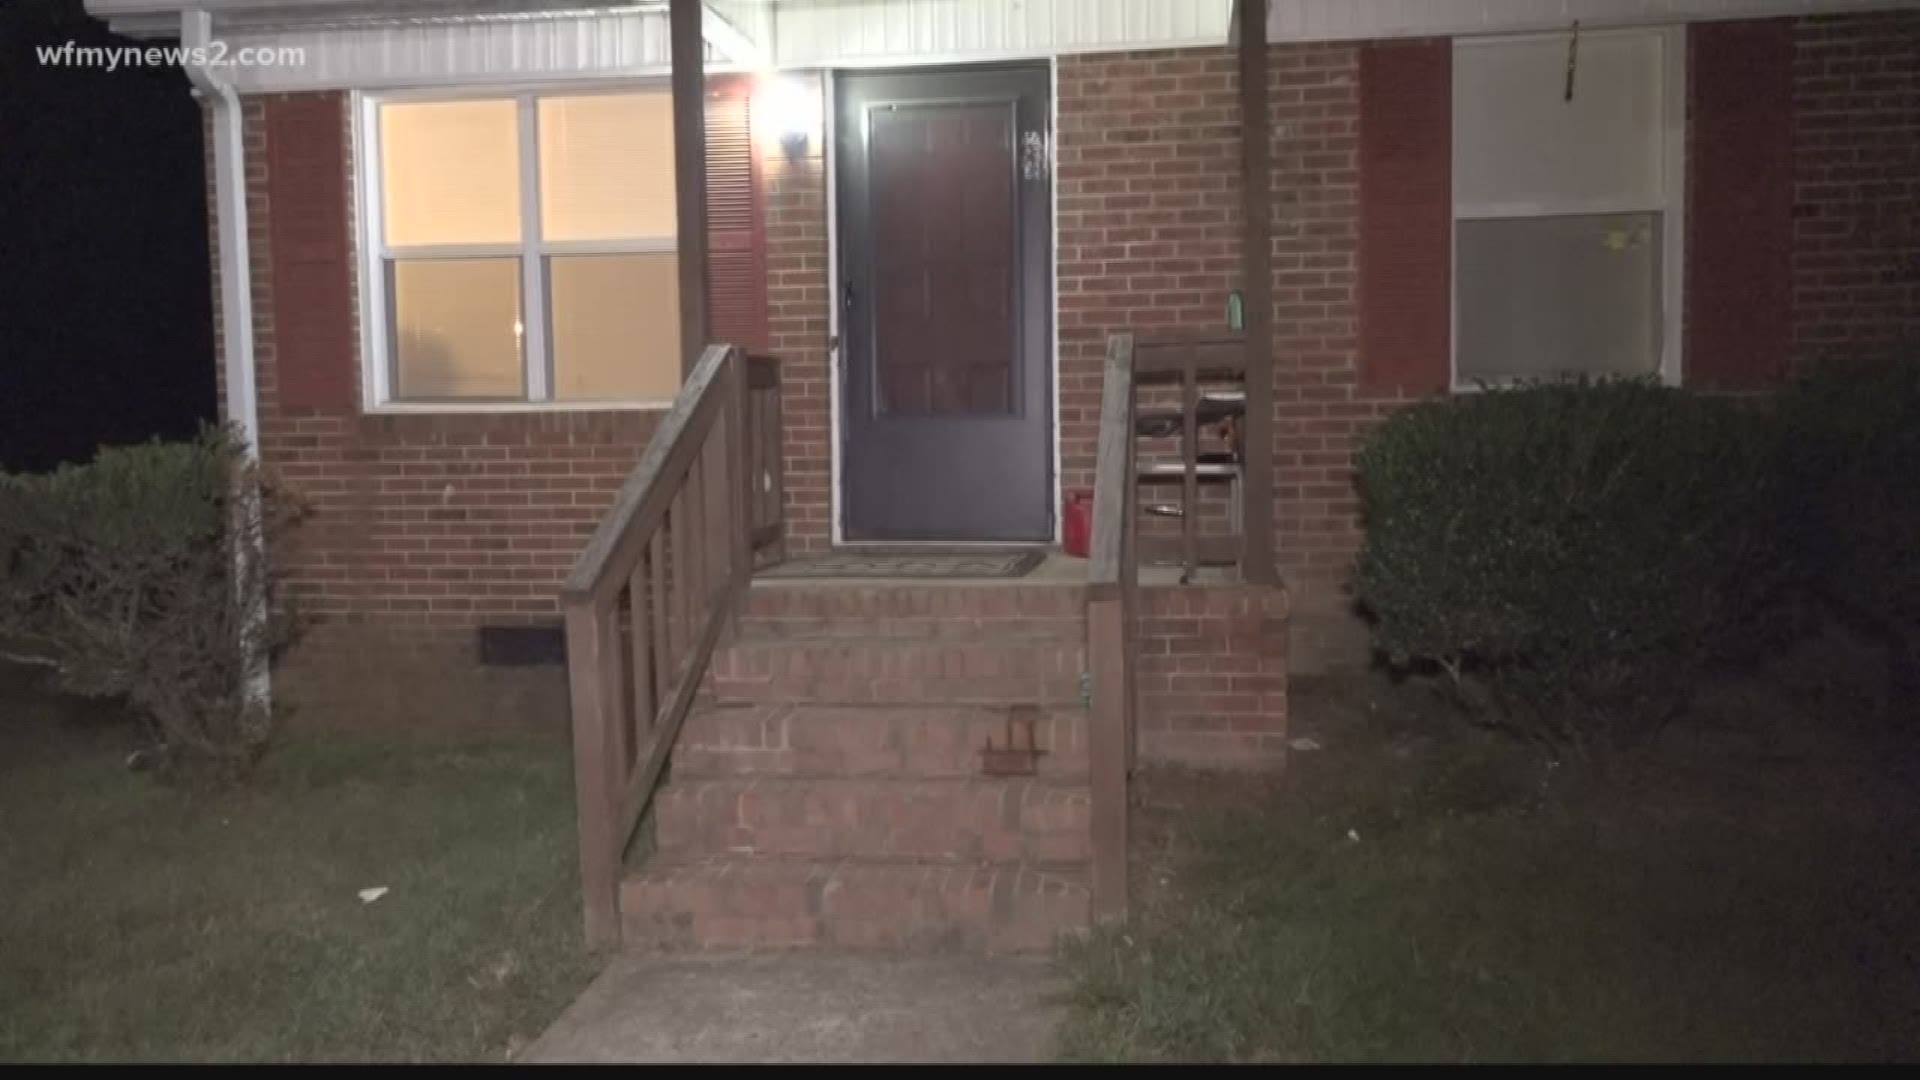 On Sunday night, a mother was tucking her kids into bed when bullets hit their home. They immediately got down on the ground to protect themselves.